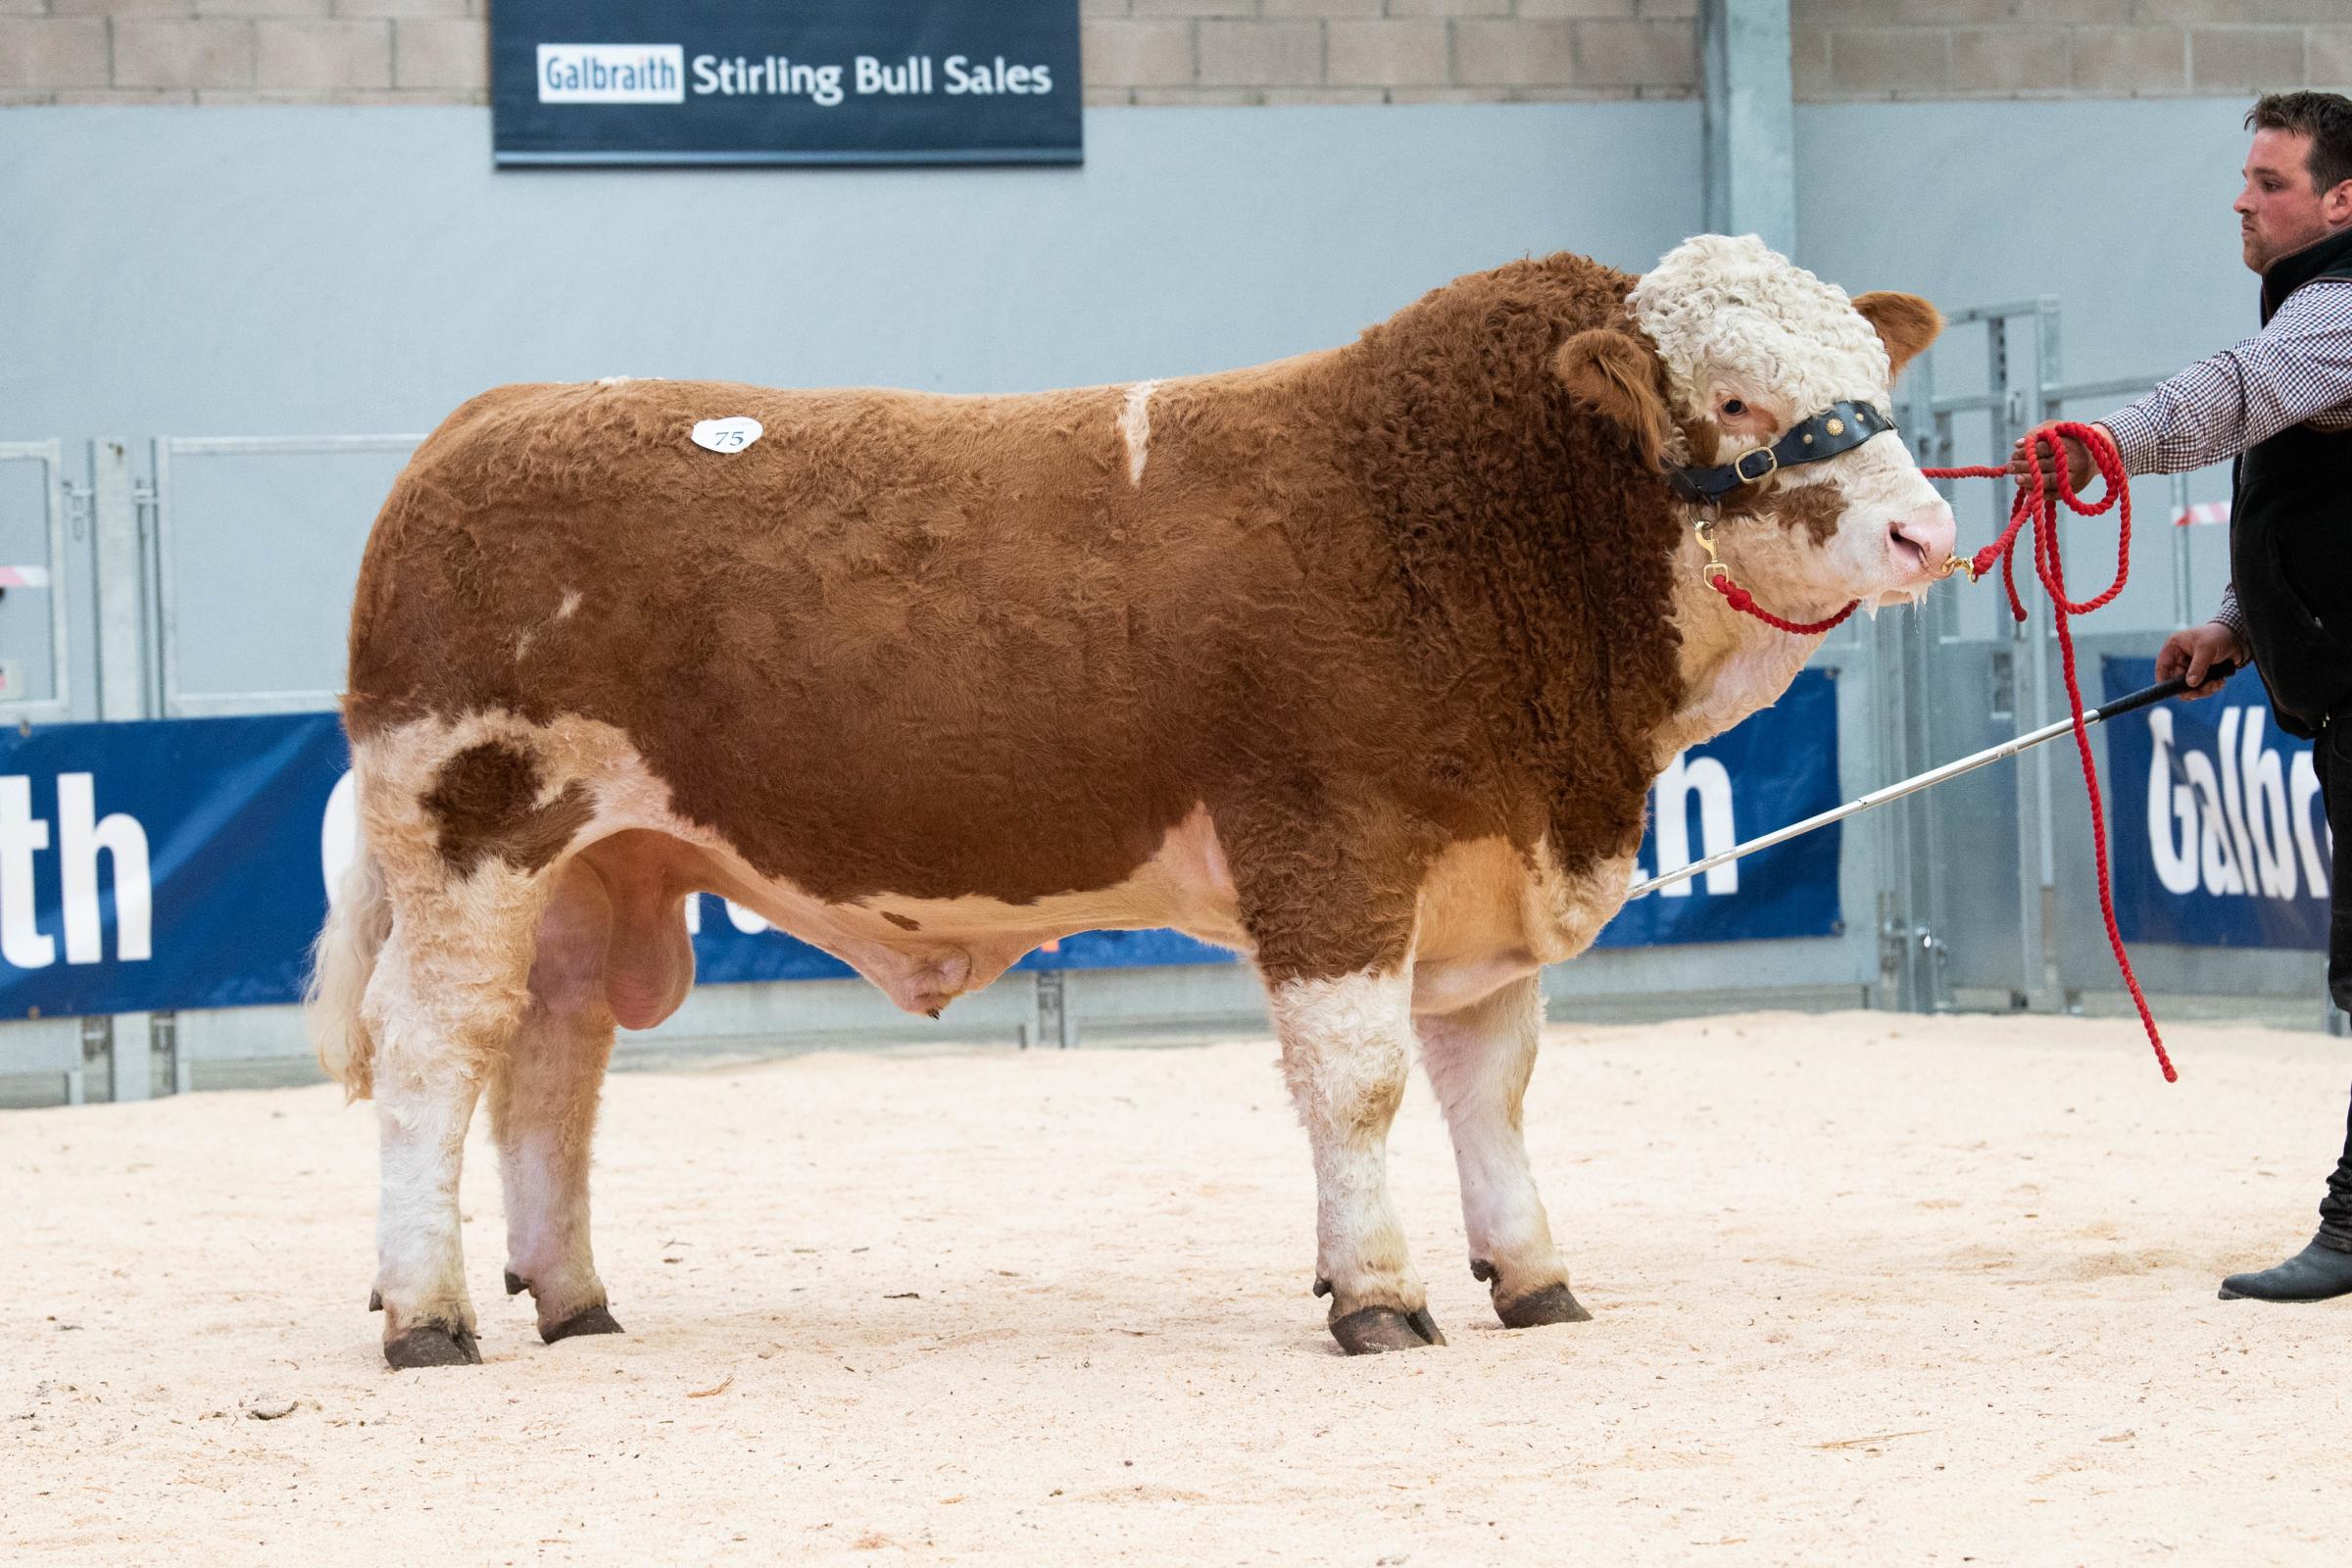 Lead priced Simmental at 9500gns was Denizes Knockout from MA Barlow Ref:RH020521002 Rob Haining / The Scottish Farmer...